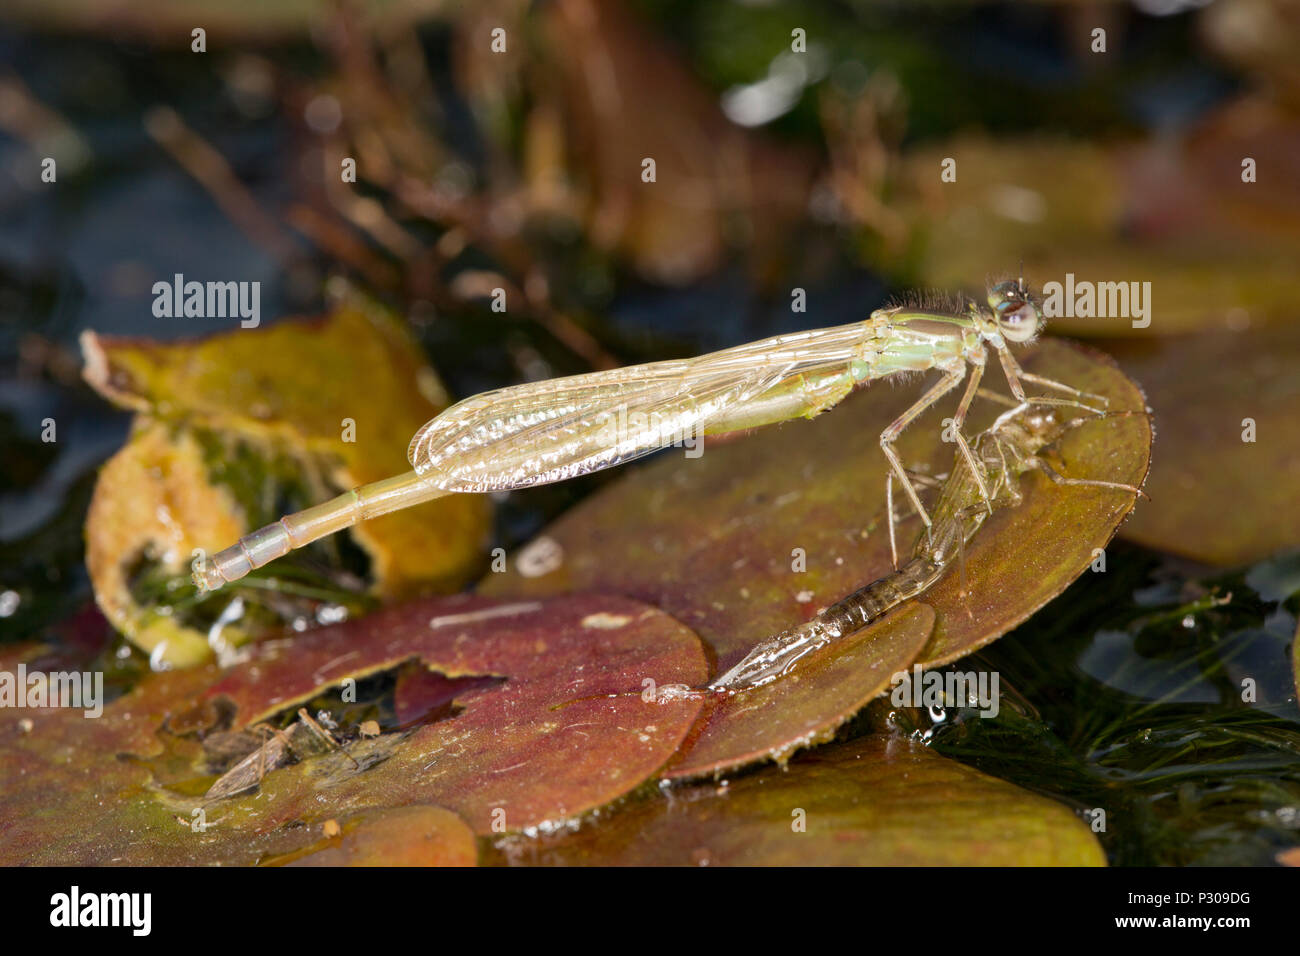 A newly emerged damselfly that has shed its larval skin, or exuvia, and is resting on a small lilypad in a garden pond. Lancashire North West England Stock Photo